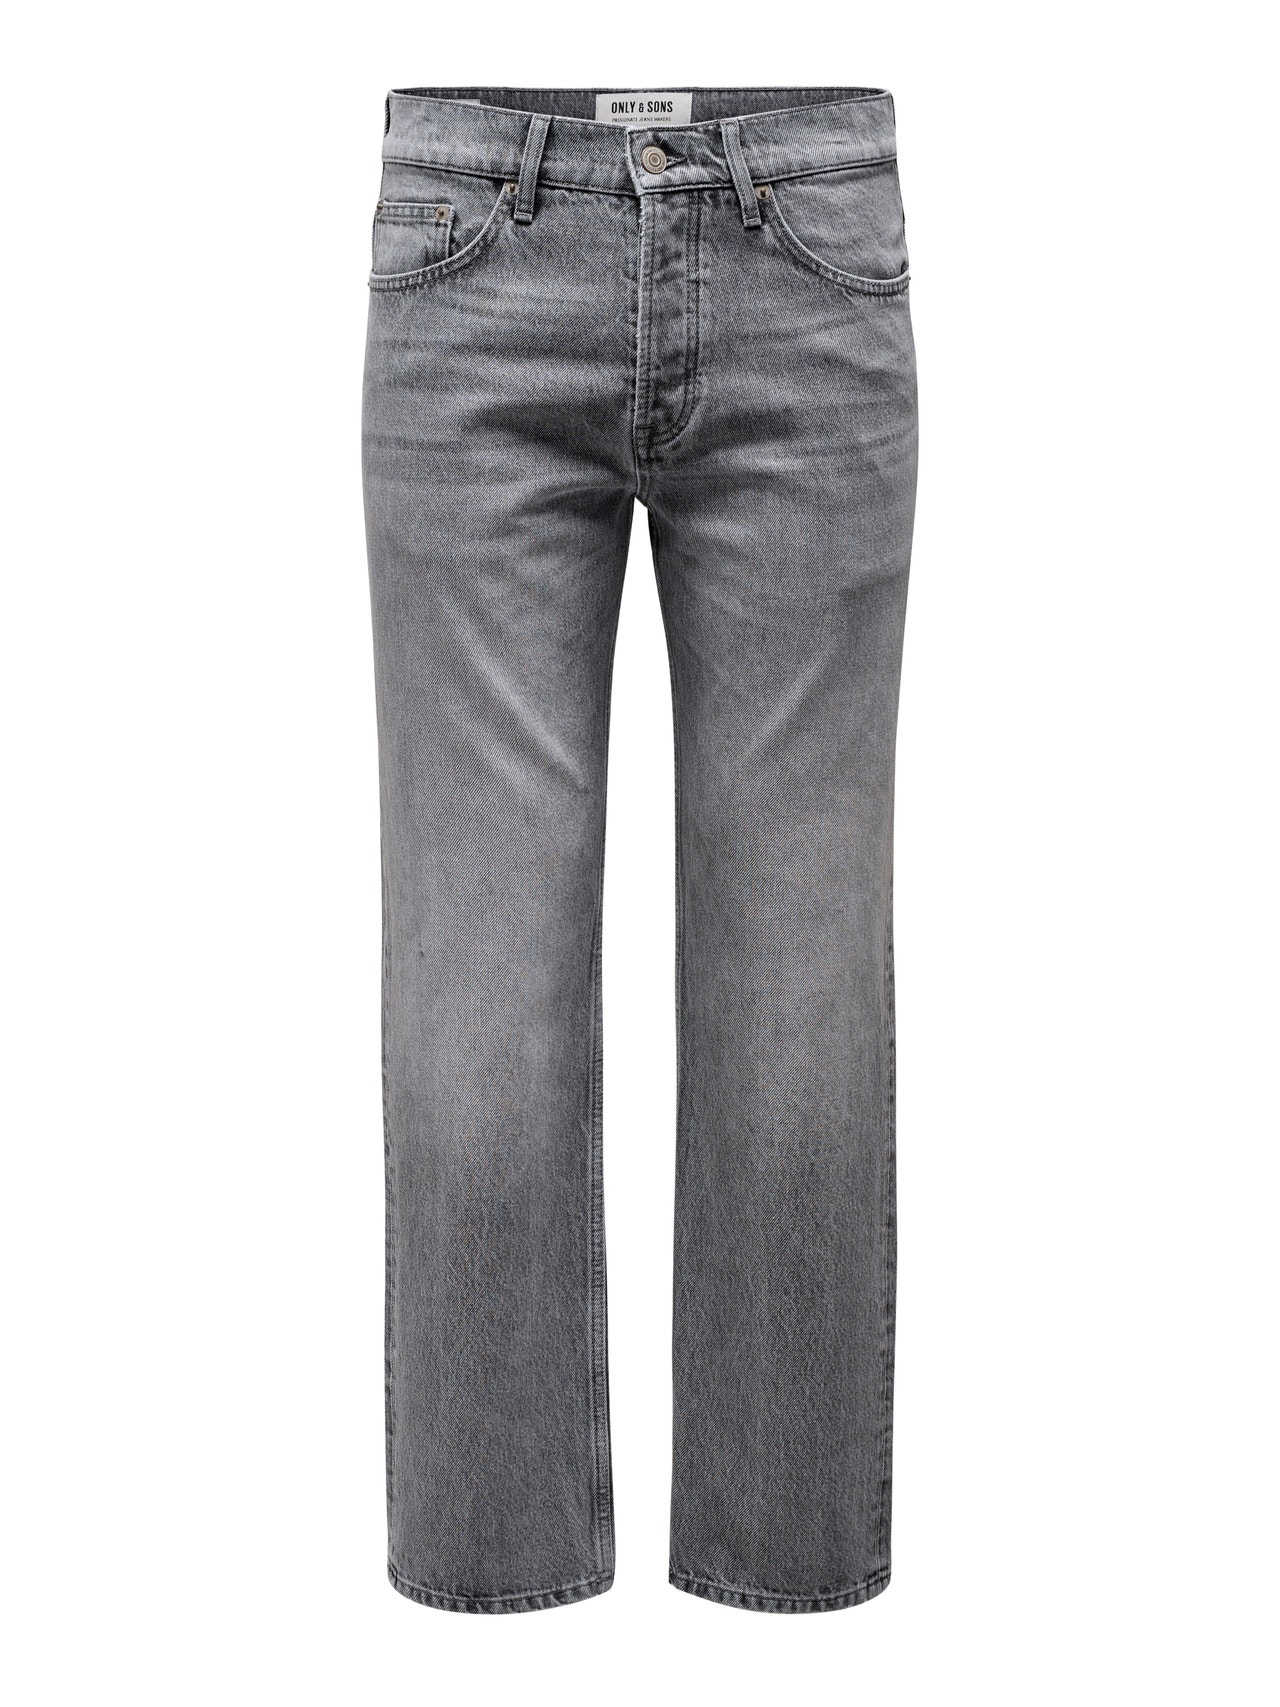 ONLY & SONS Straight Fit Mid rise Jeans -Medium Grey Denim - 22028202